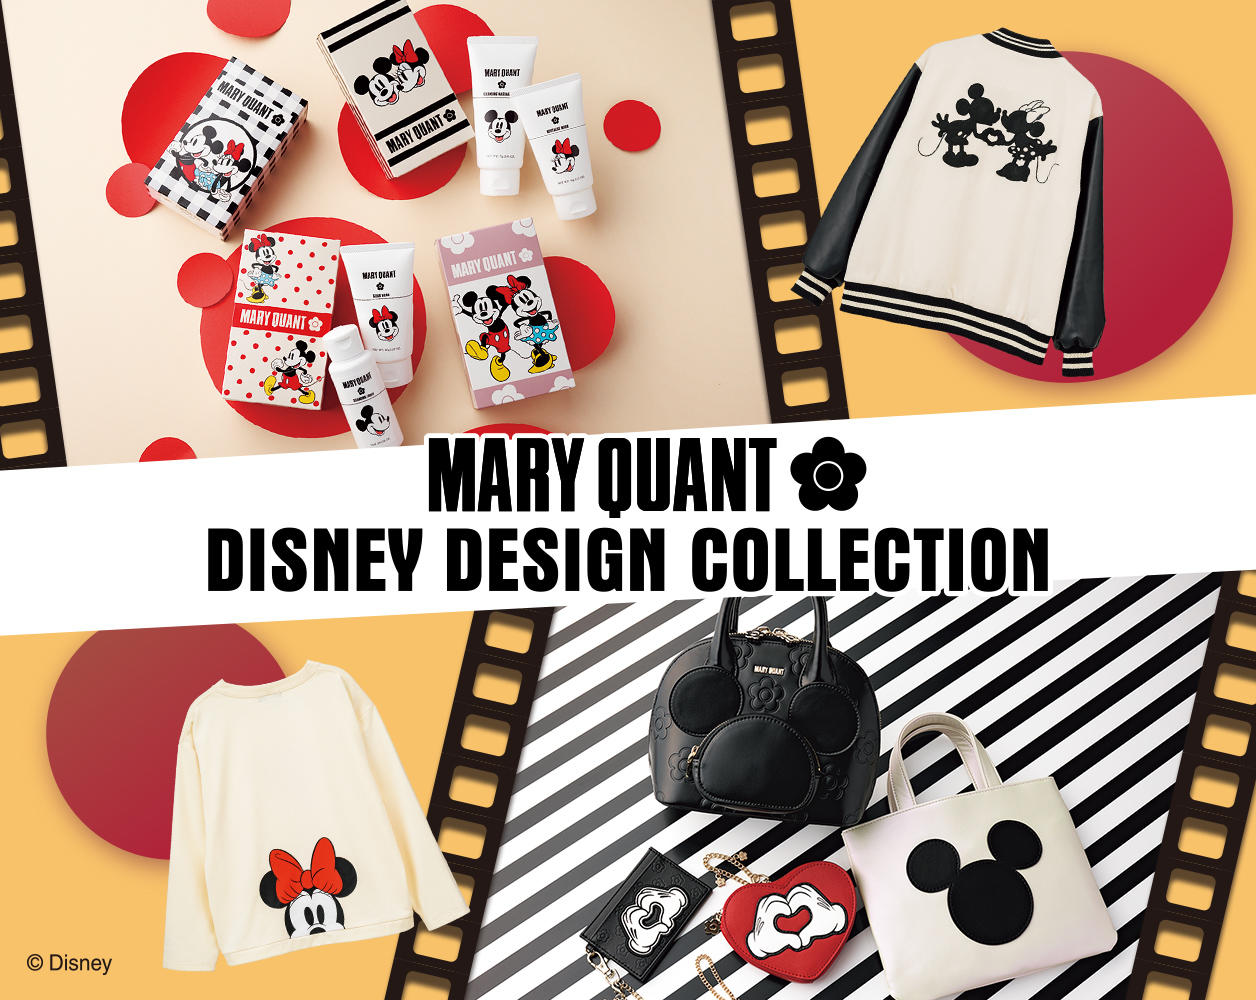 MARY QUANT DISNEY DESIGN COLLECTION